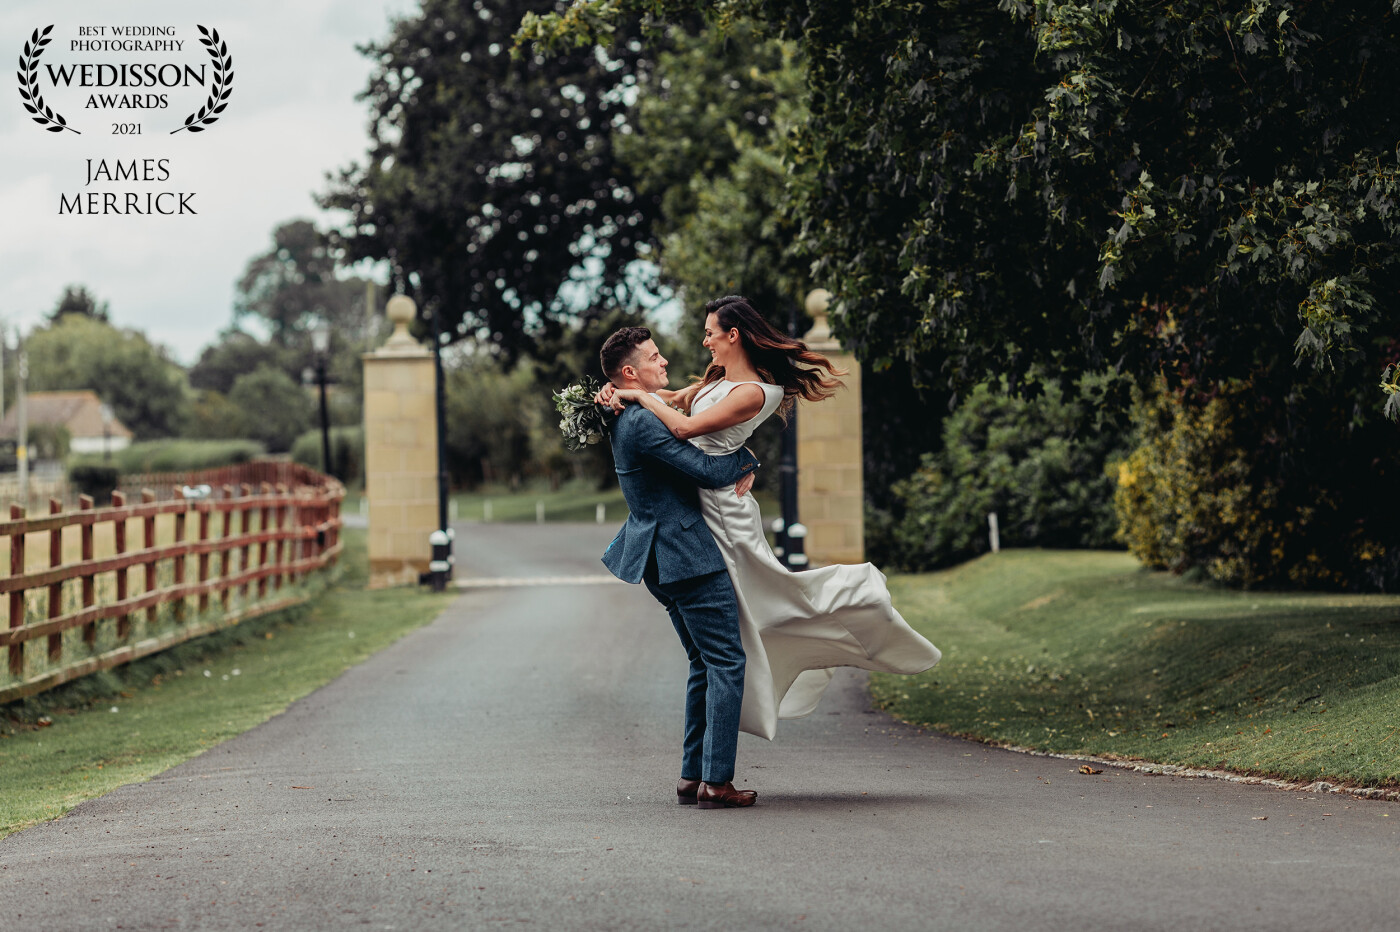 This image was taken at Tern Hill Hall, a beautiful wedding venue in Shropshire, England. The driveway there is epic and it is made for shots like this!